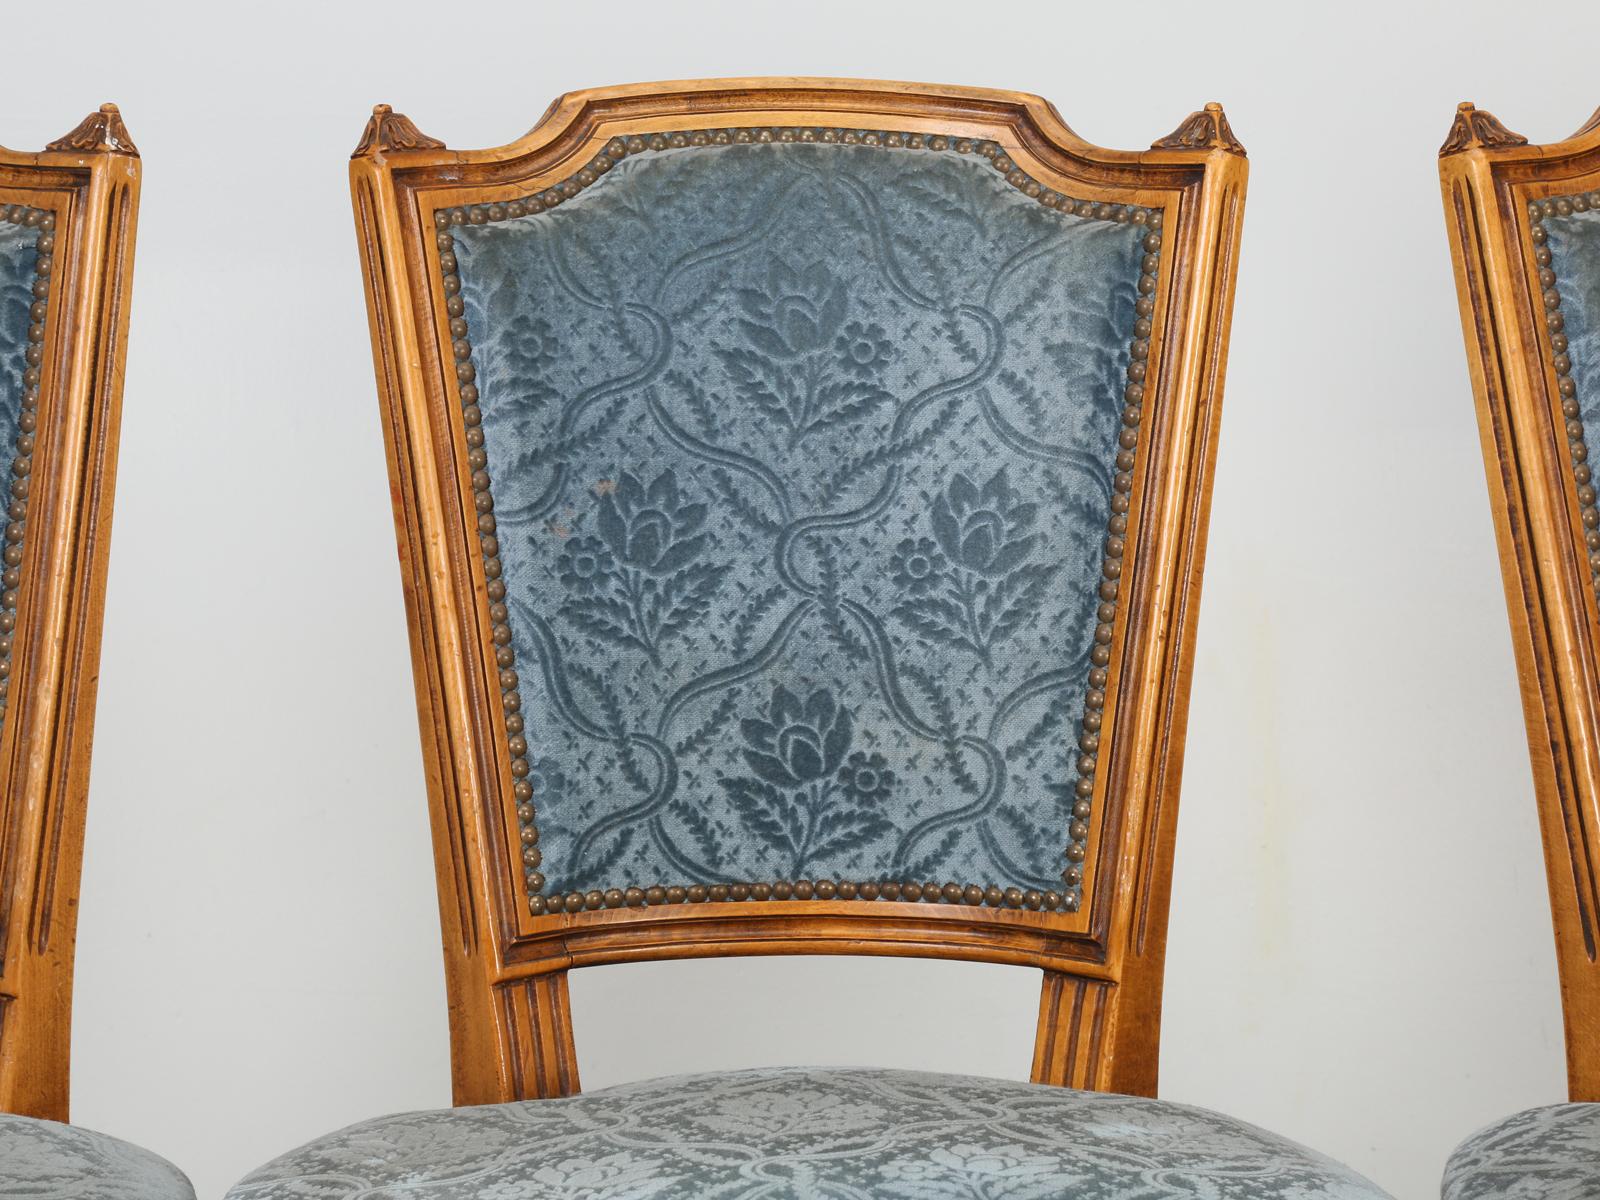 French Louis XVI style dining chairs in their original finish with rather dirty old fabric. Structurally fine, but will require new fabric covering.